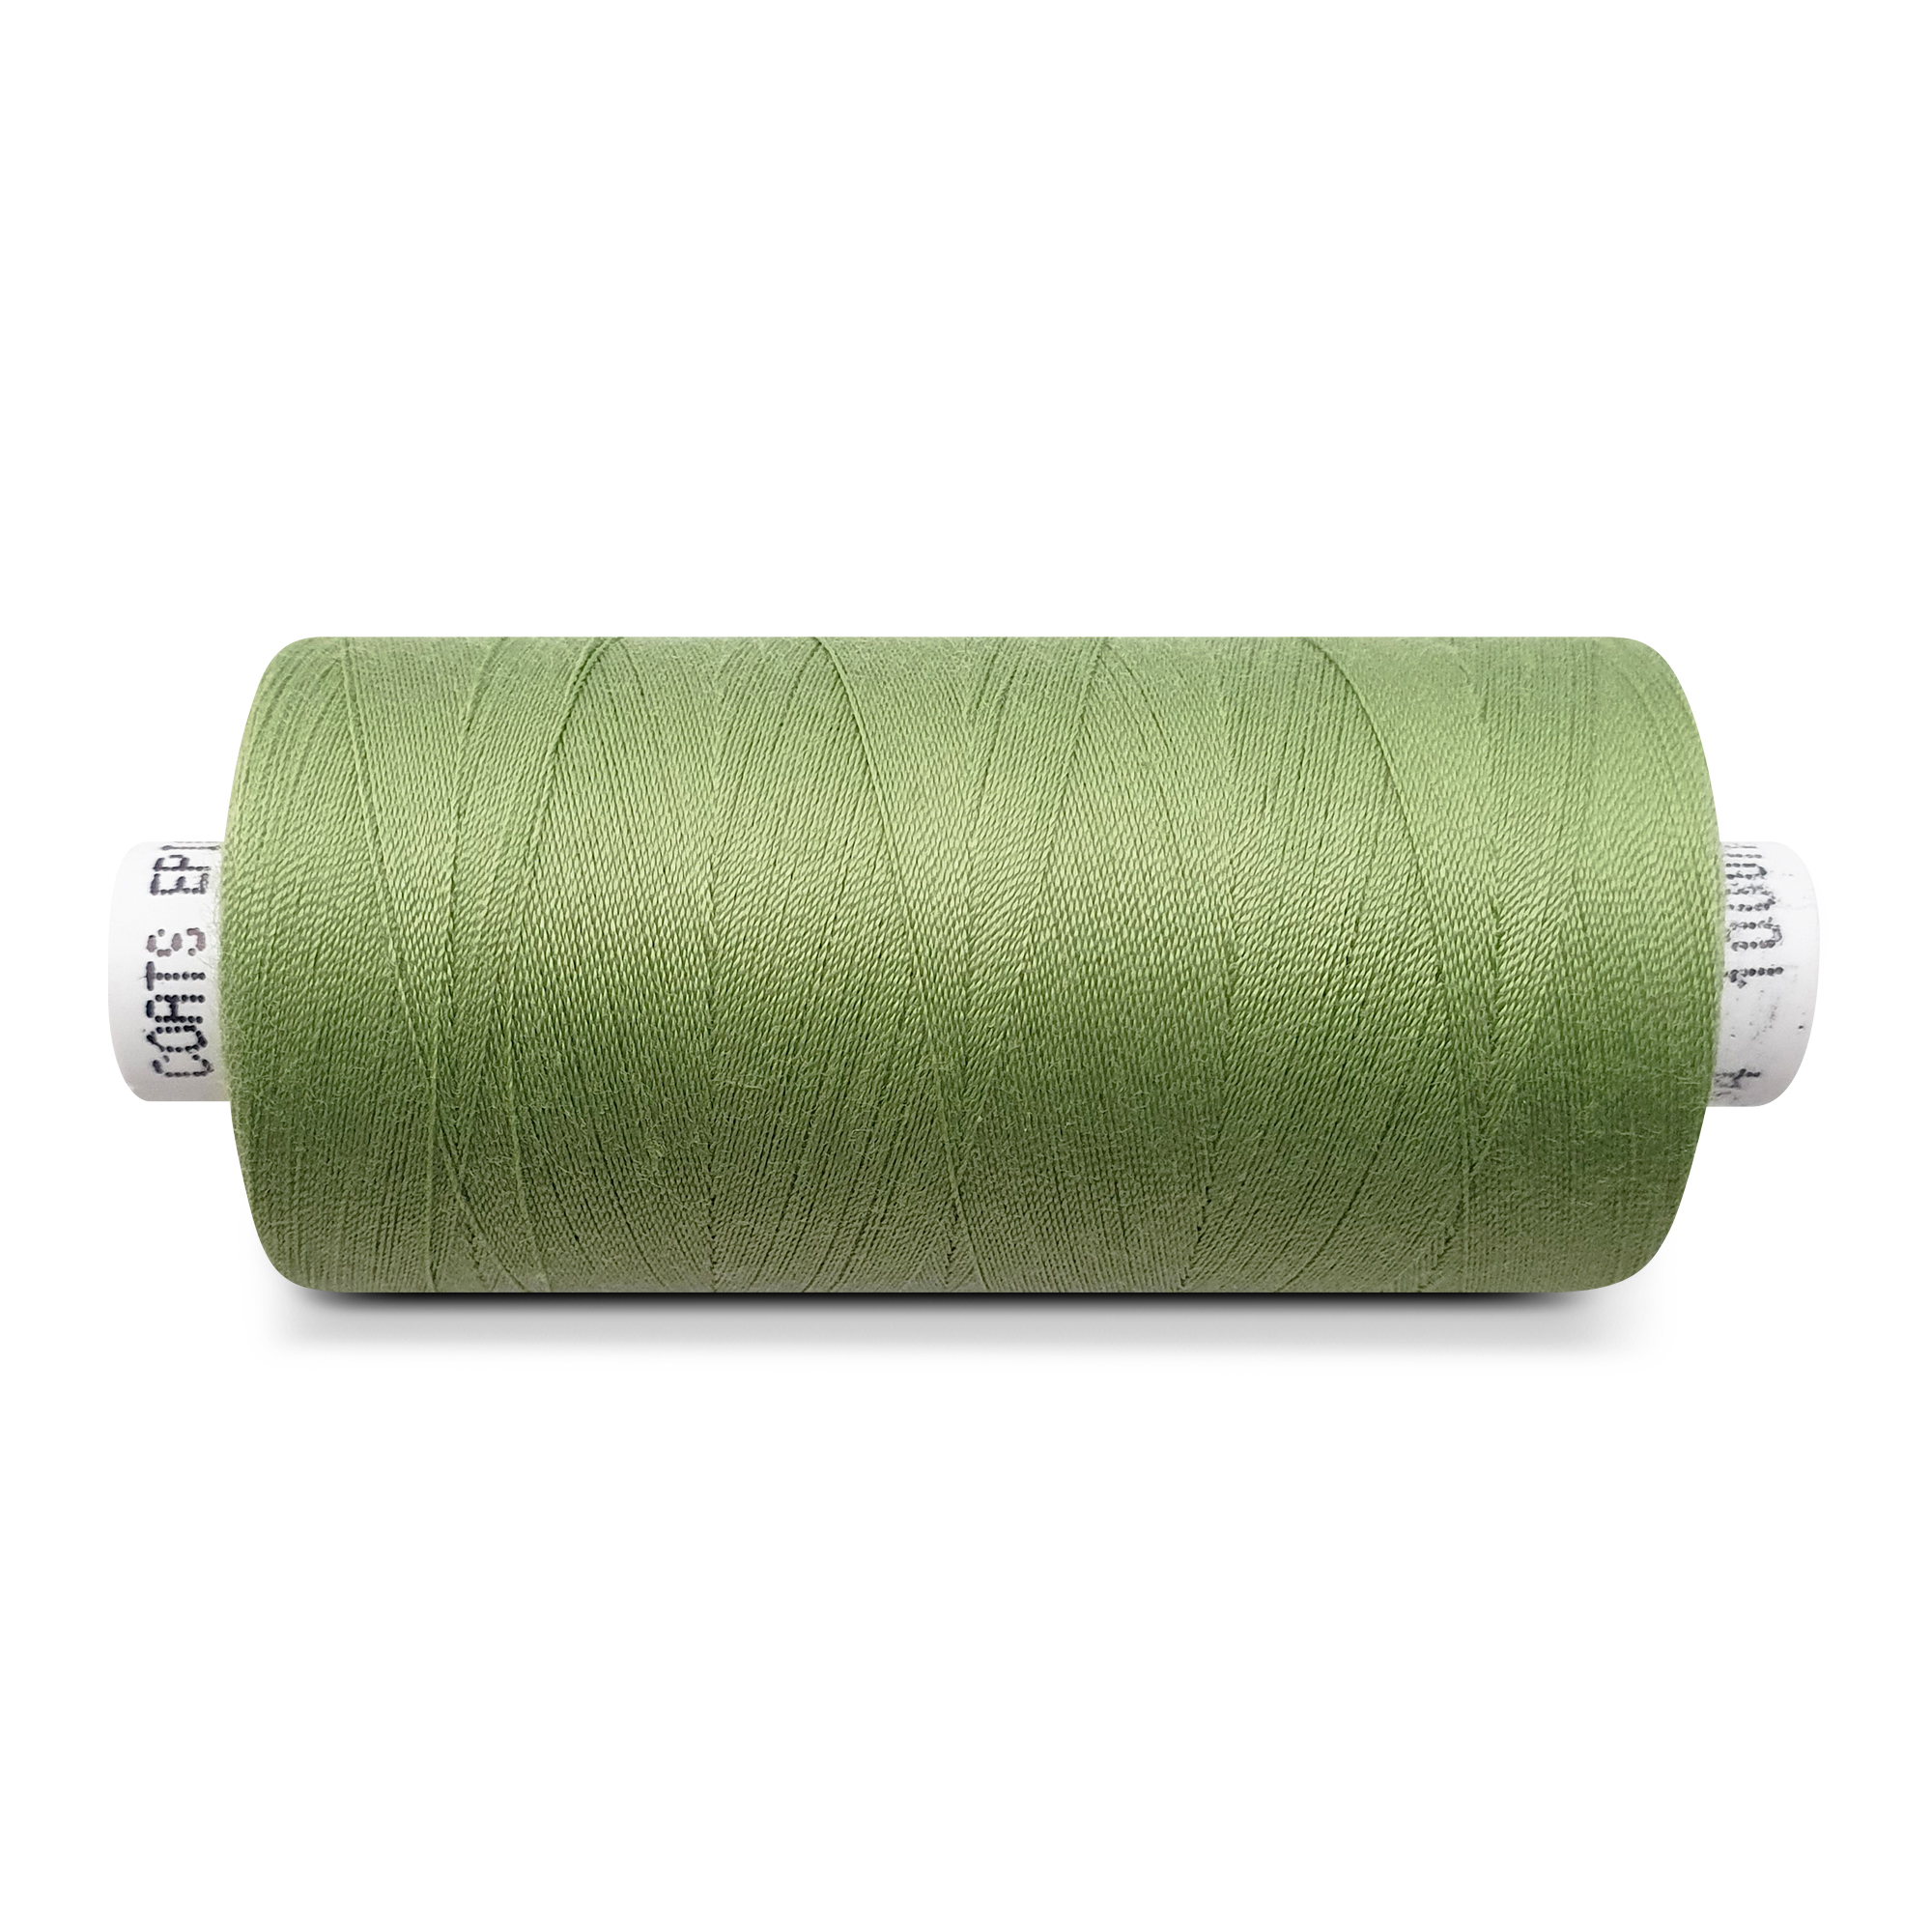 Jeans/Sewing thread linden